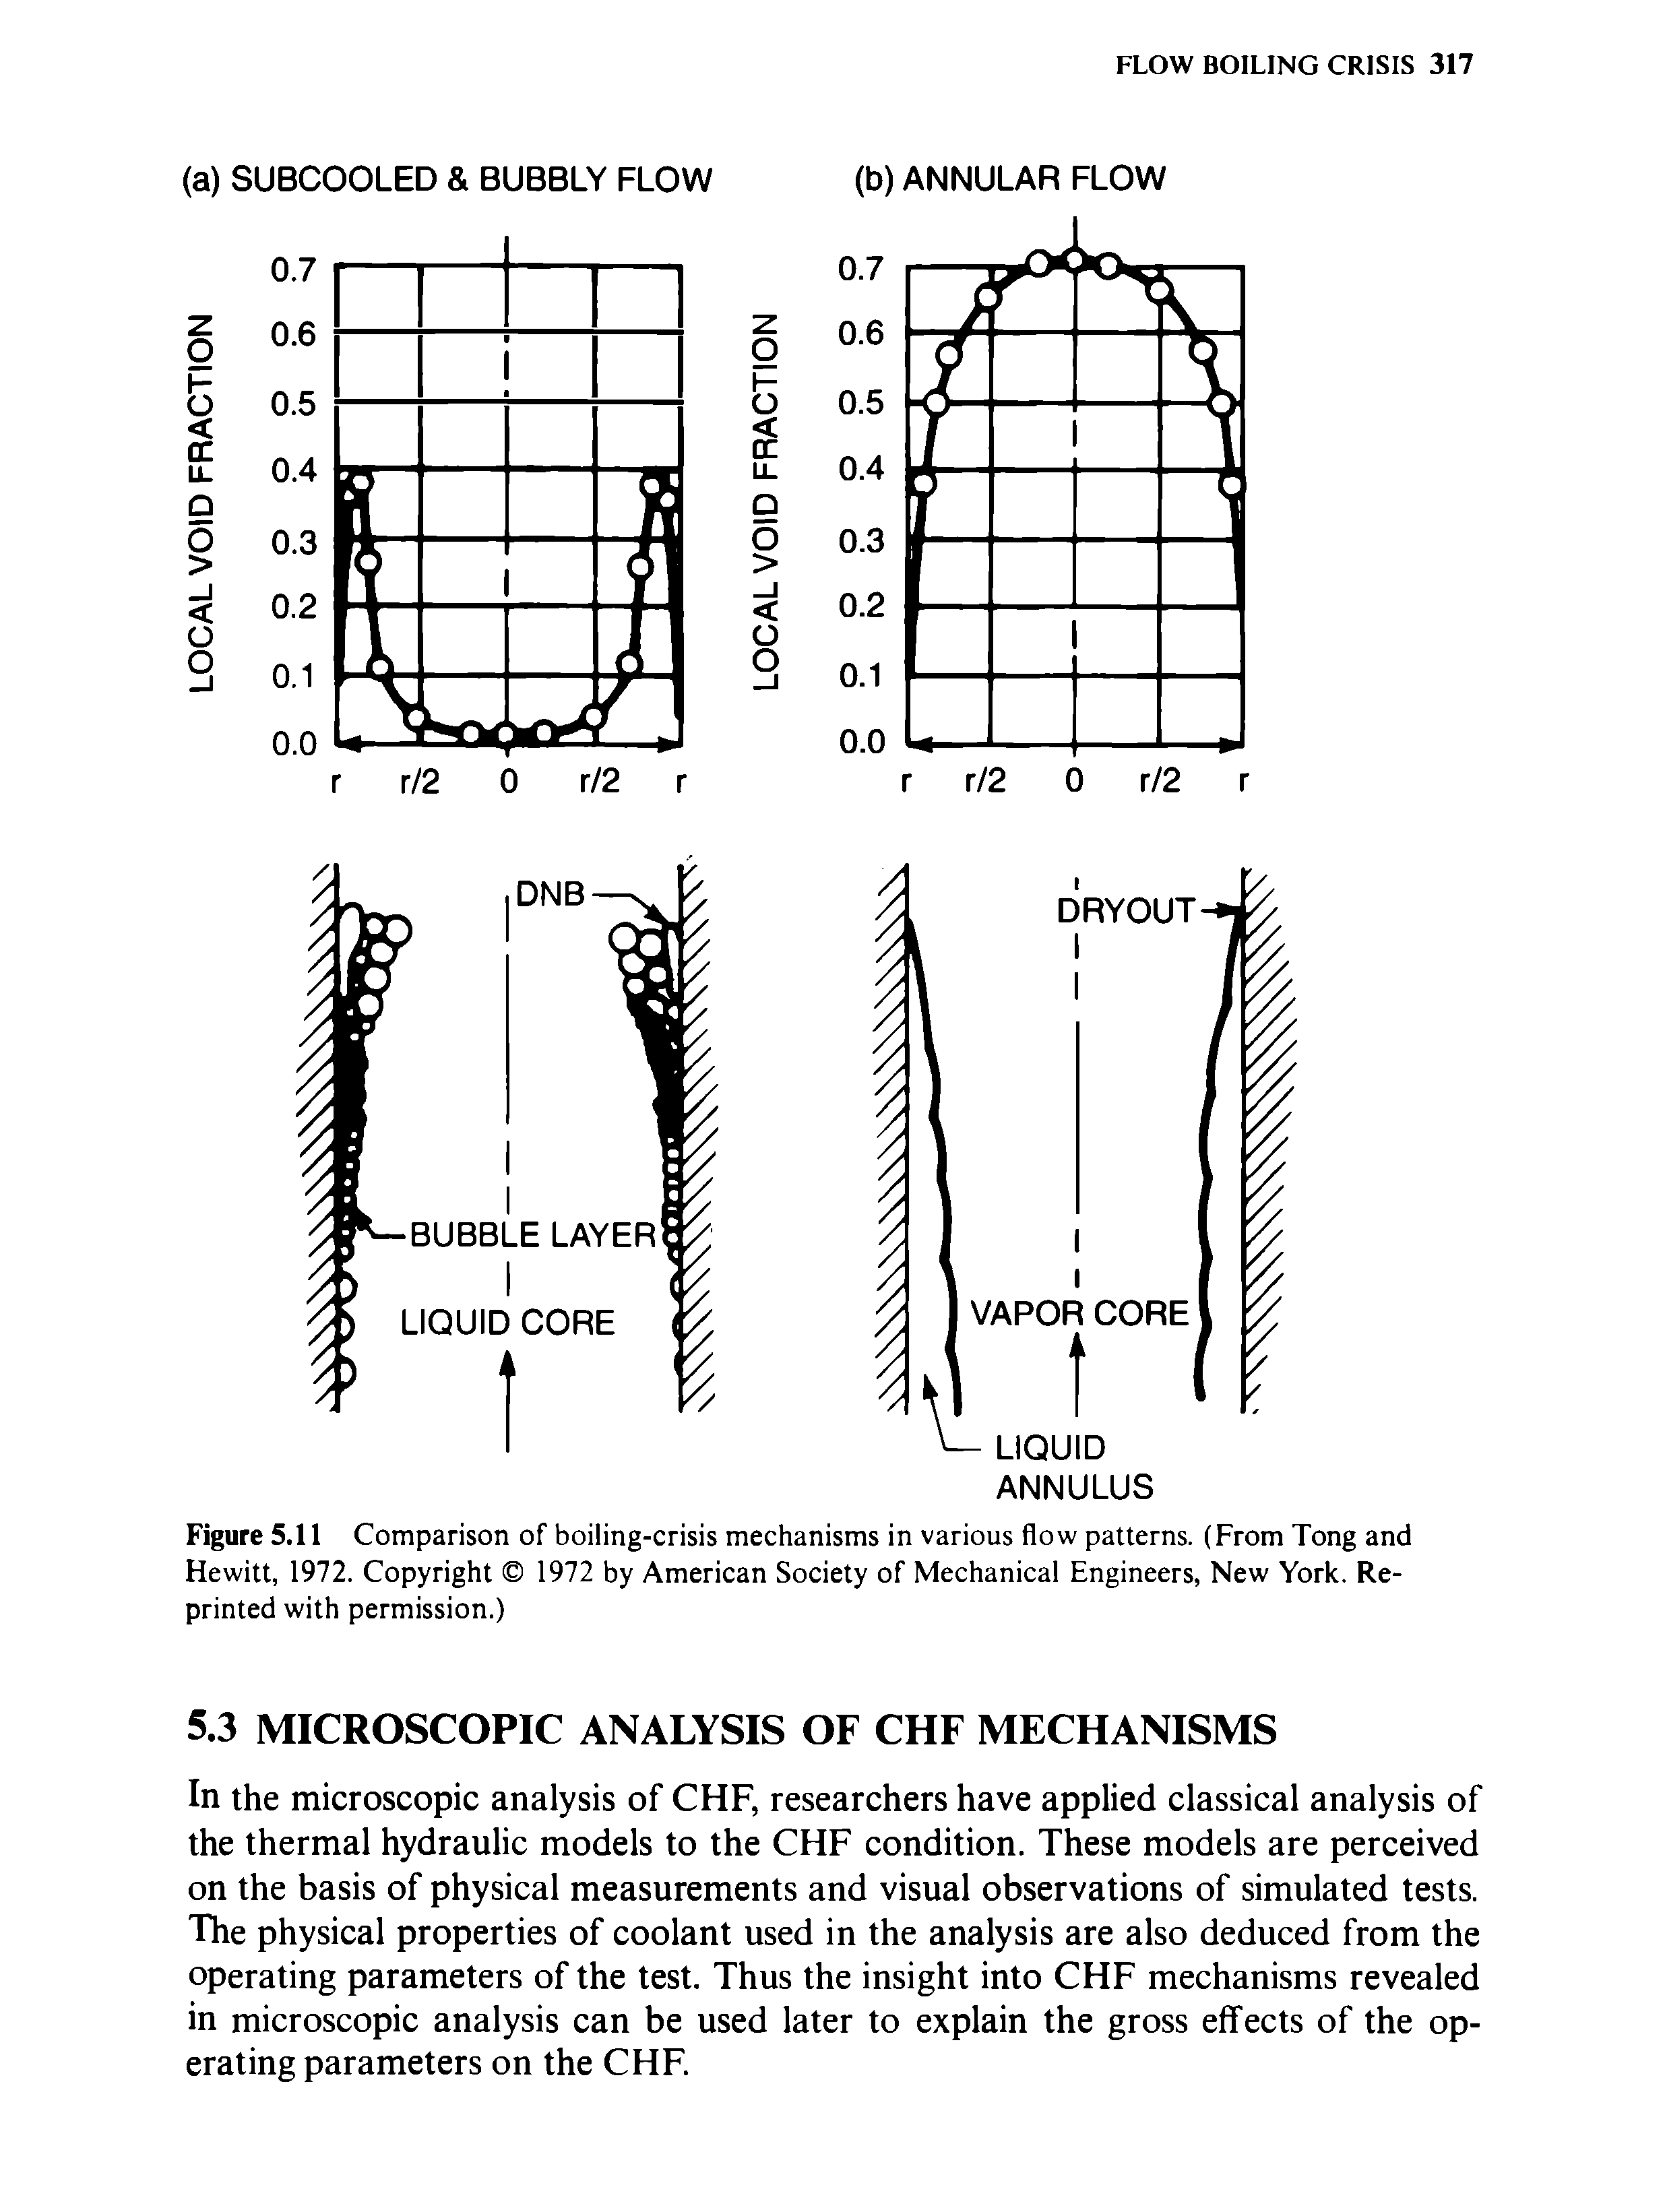 Figure 5.11 Comparison of boiling-crisis mechanisms in various flow patterns. (From Tong and Hewitt, 1972. Copyright 1972 by American Society of Mechanical Engineers, New York. Reprinted with permission.)...